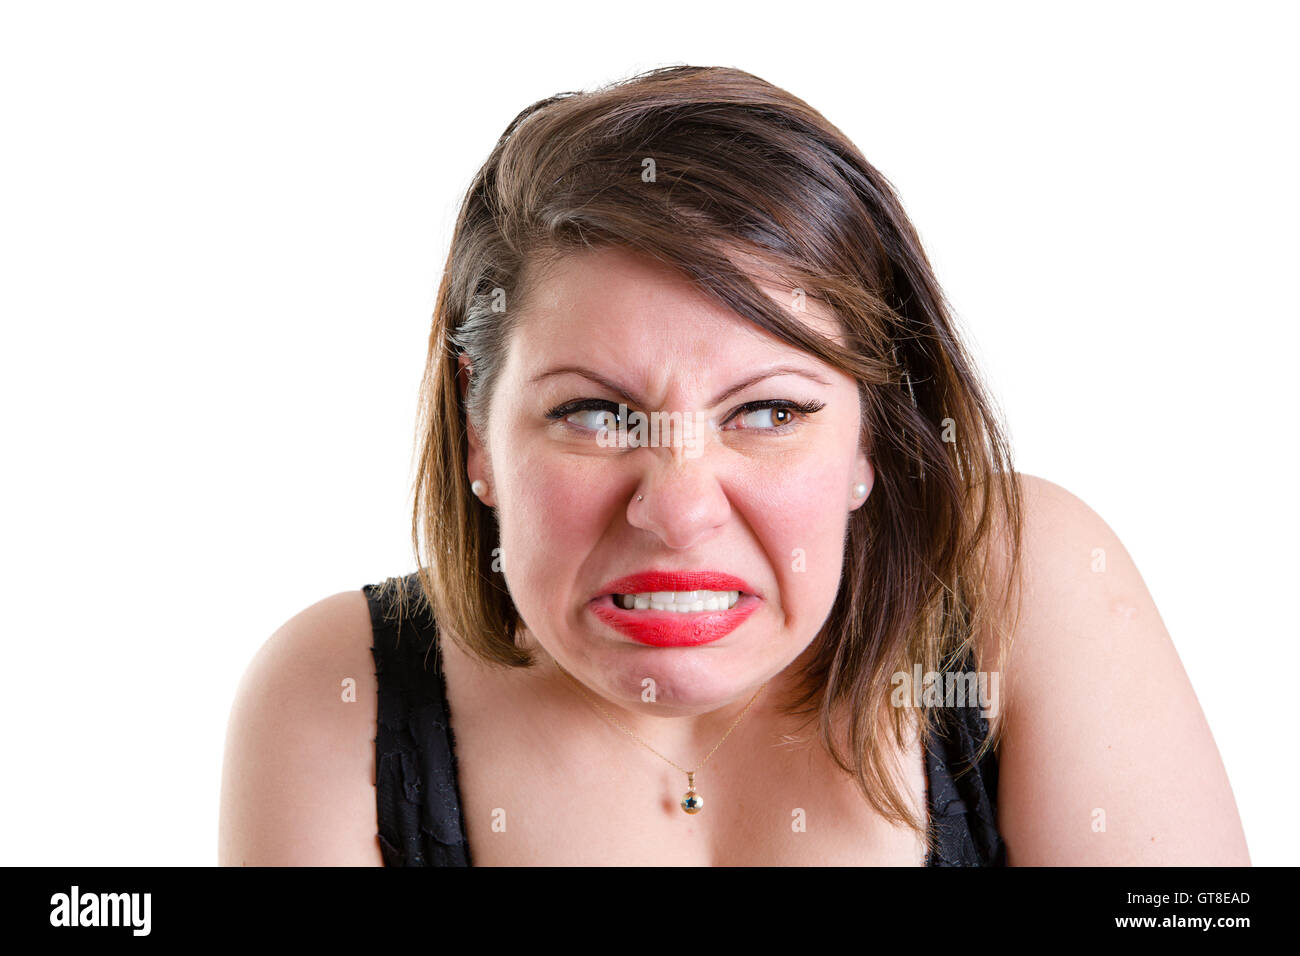 Angry jealous vindictive woman hunching her shoulders and snarling as she looks furtively sideways with a baleful expression, on Stock Photo